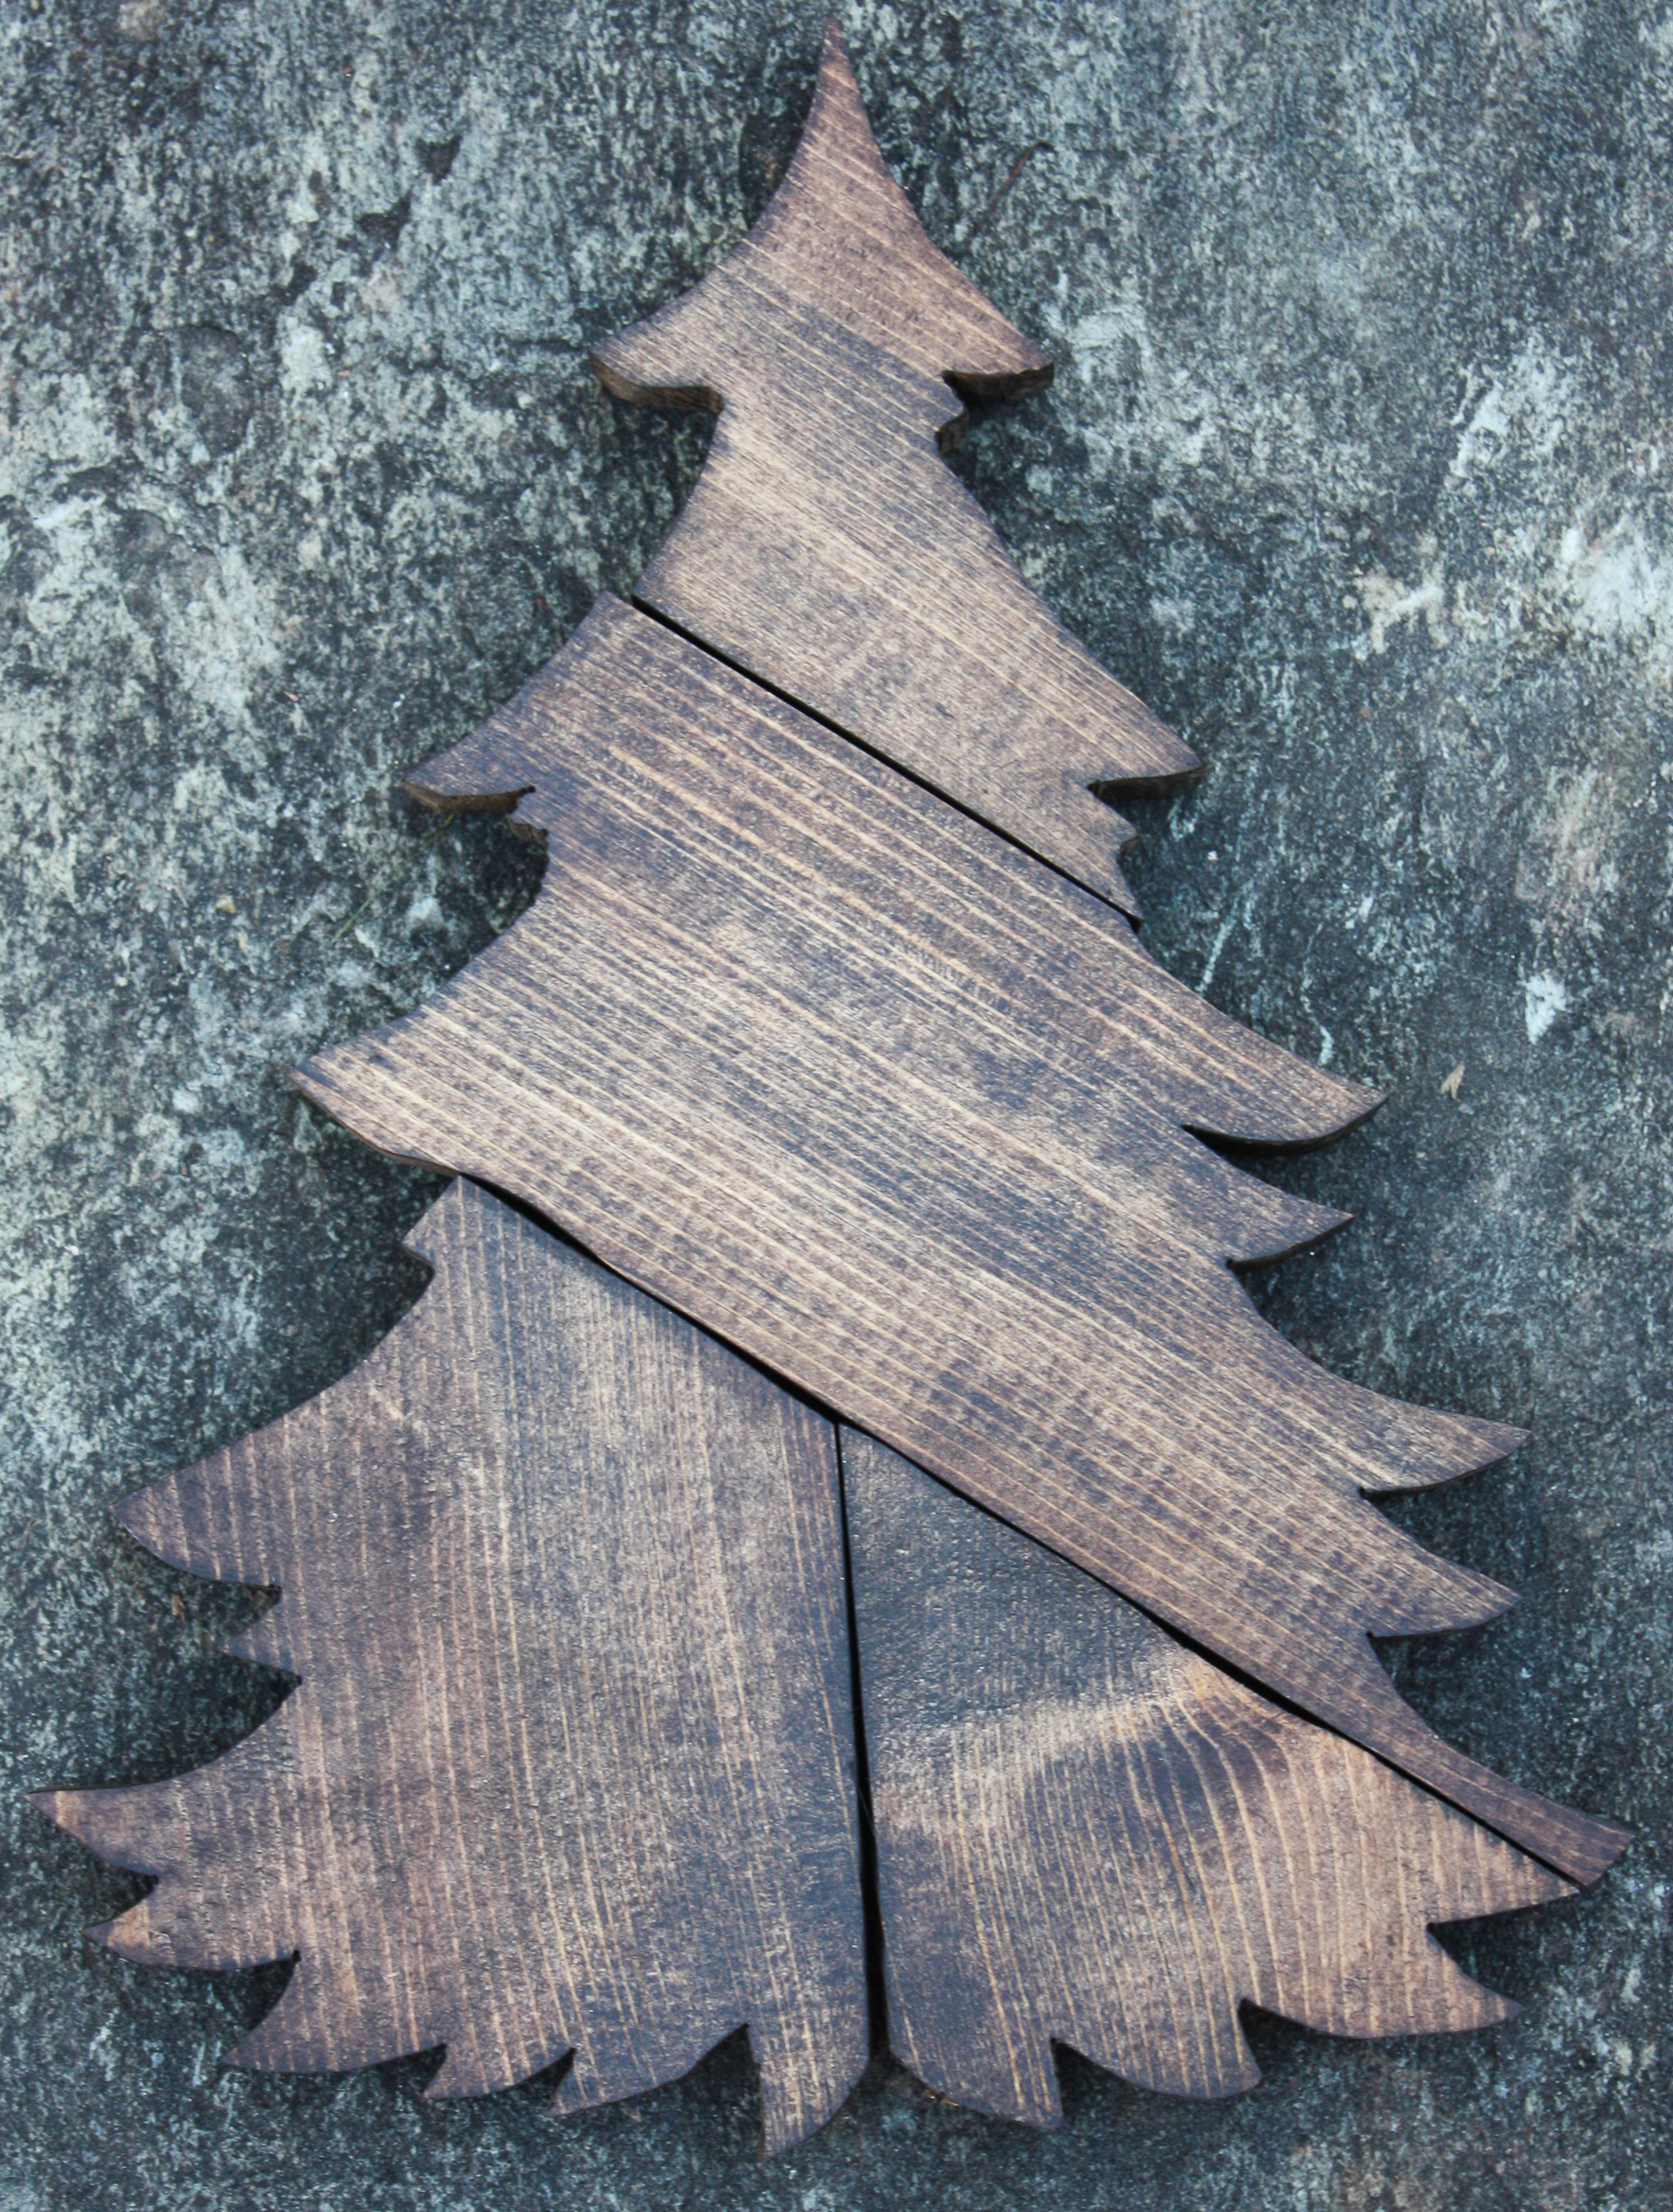 How to Make a Patchwork Wood Christmas Tree - Follow the step-by-step tutorial to make your own.